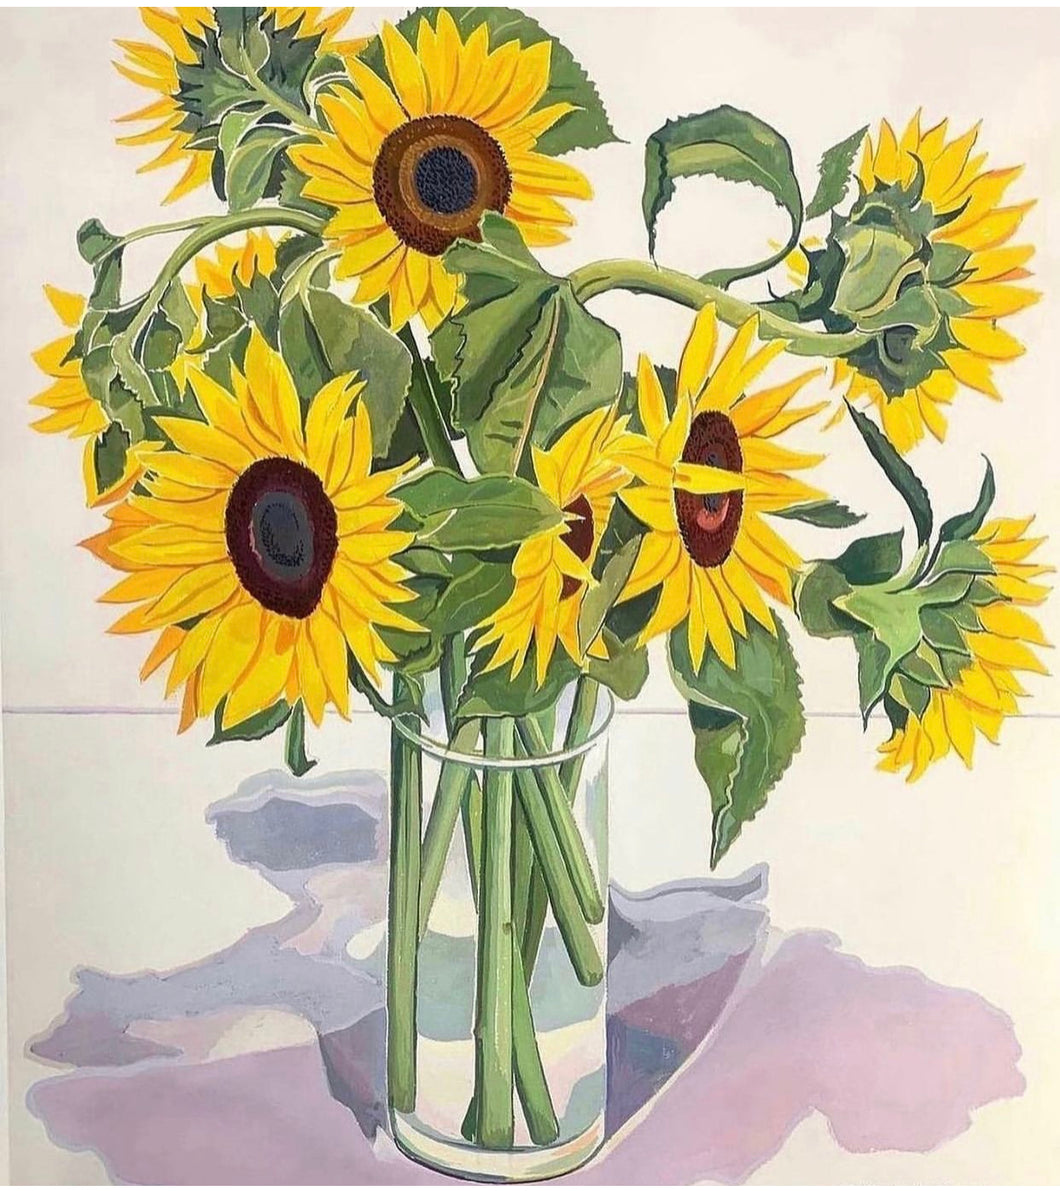 Sunflowers With Shadows